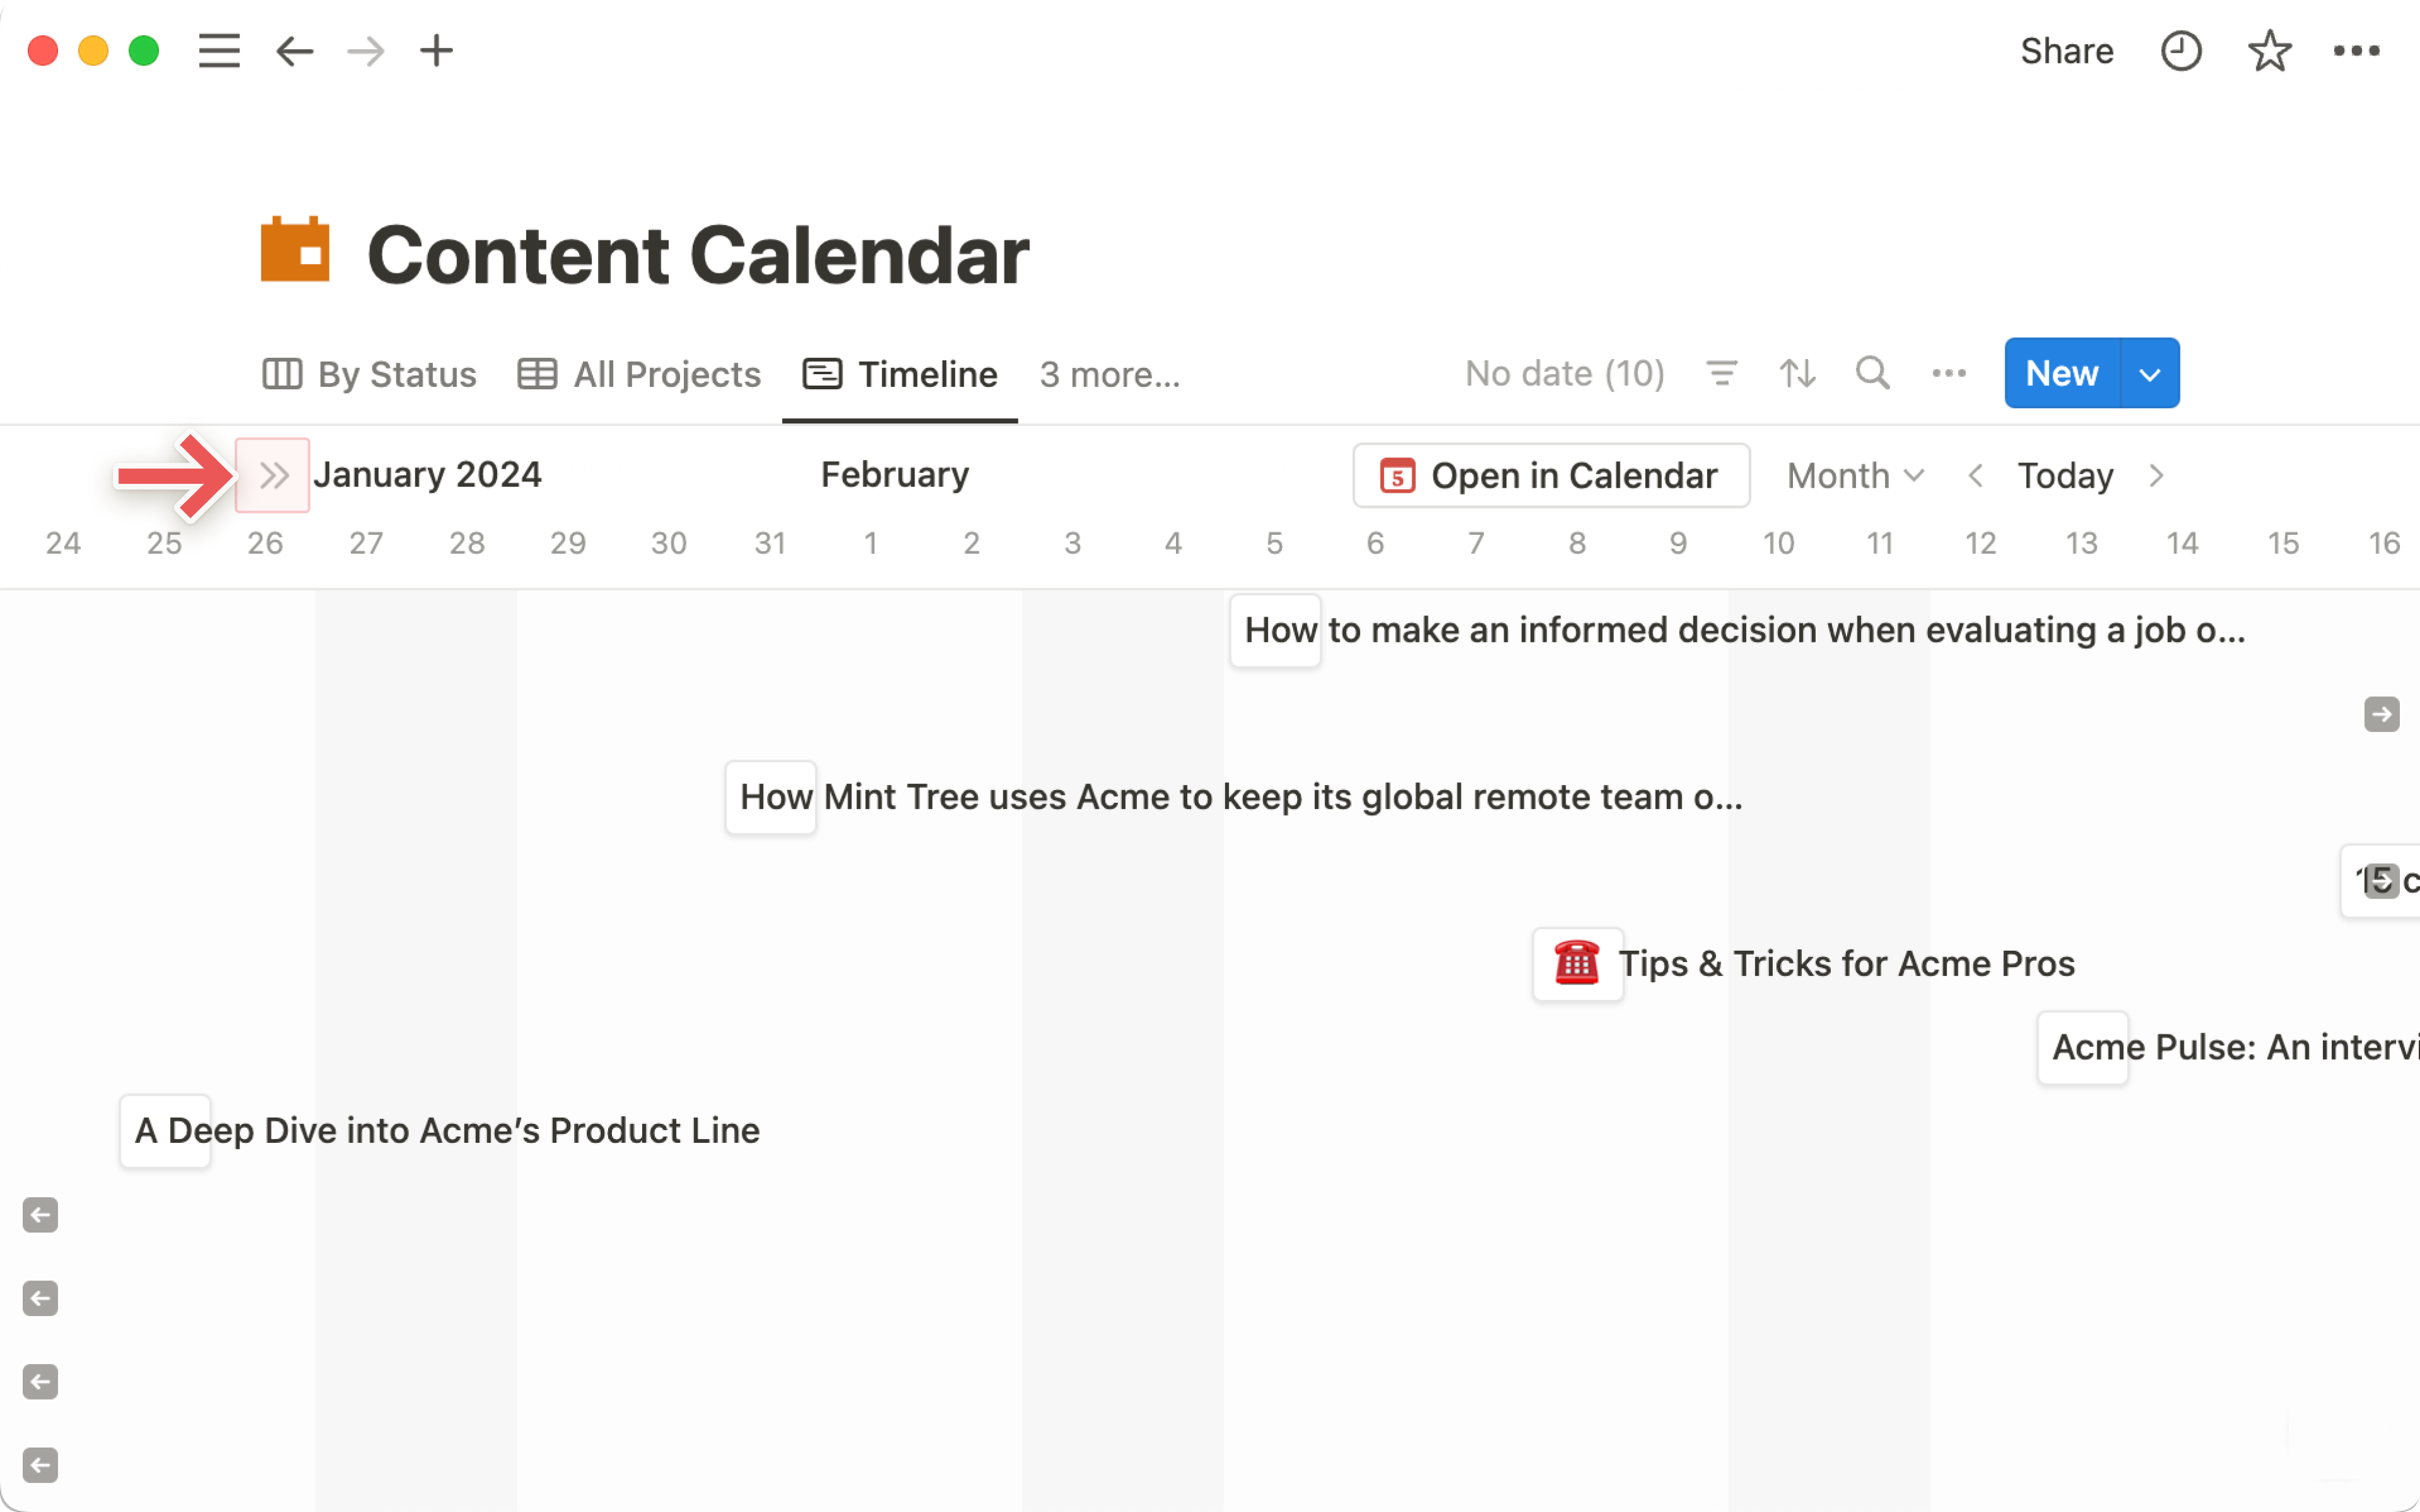 hc: show table in timeline view